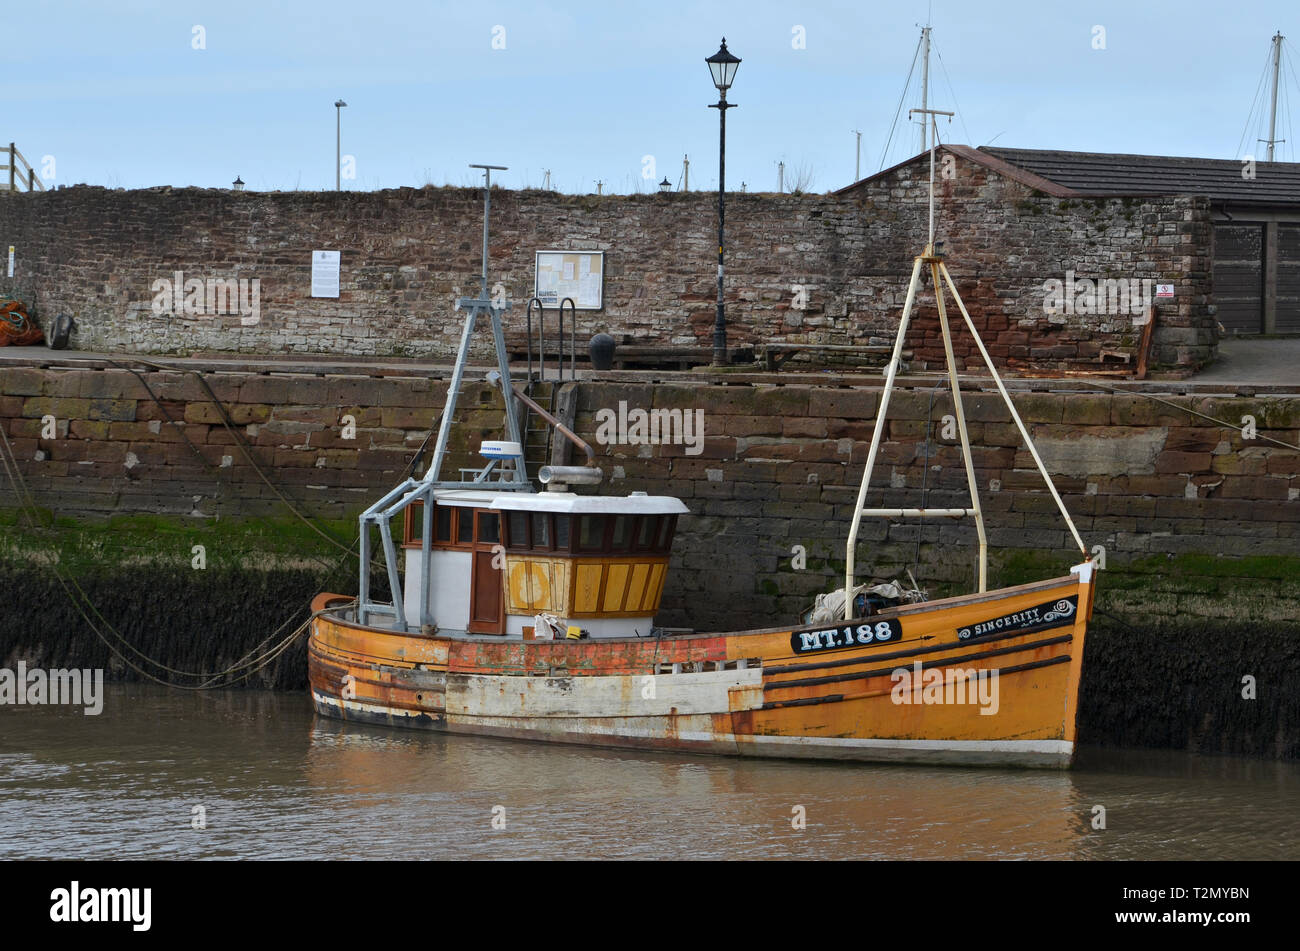 Fishing boat Sincerity MT188 fishing boat in Maryport Harbour. Maryport is a town and civil parish in the Allerdale borough of Cumbria, England. Stock Photo